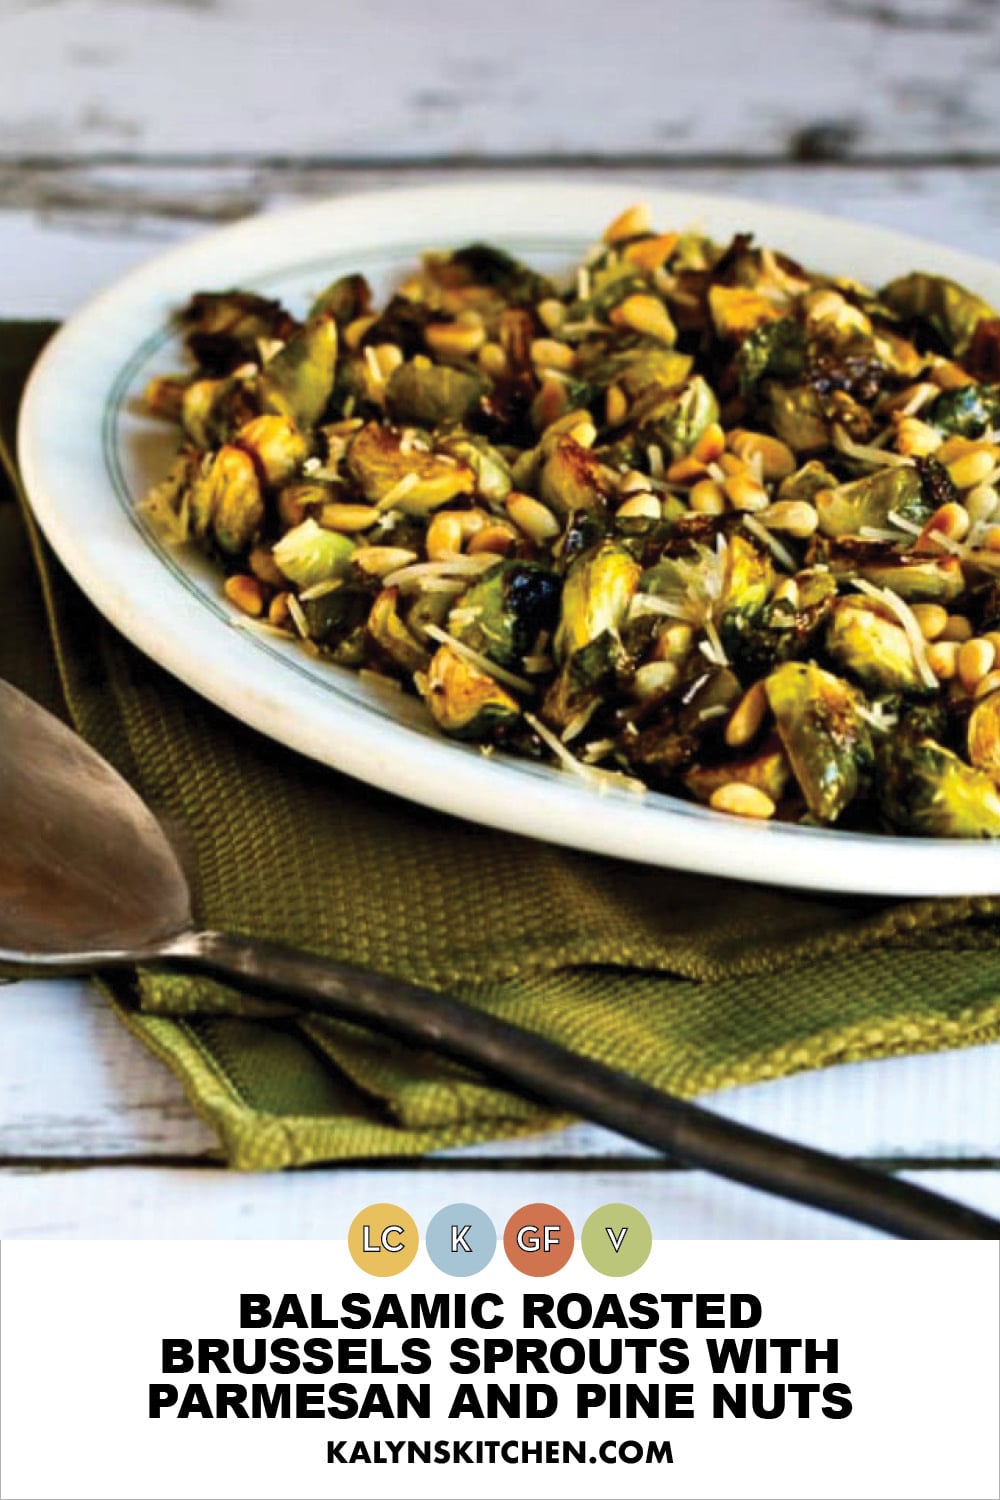 Pinterest image of Balsamic Roasted Brussels Sprouts with Parmesan and Pine Nuts